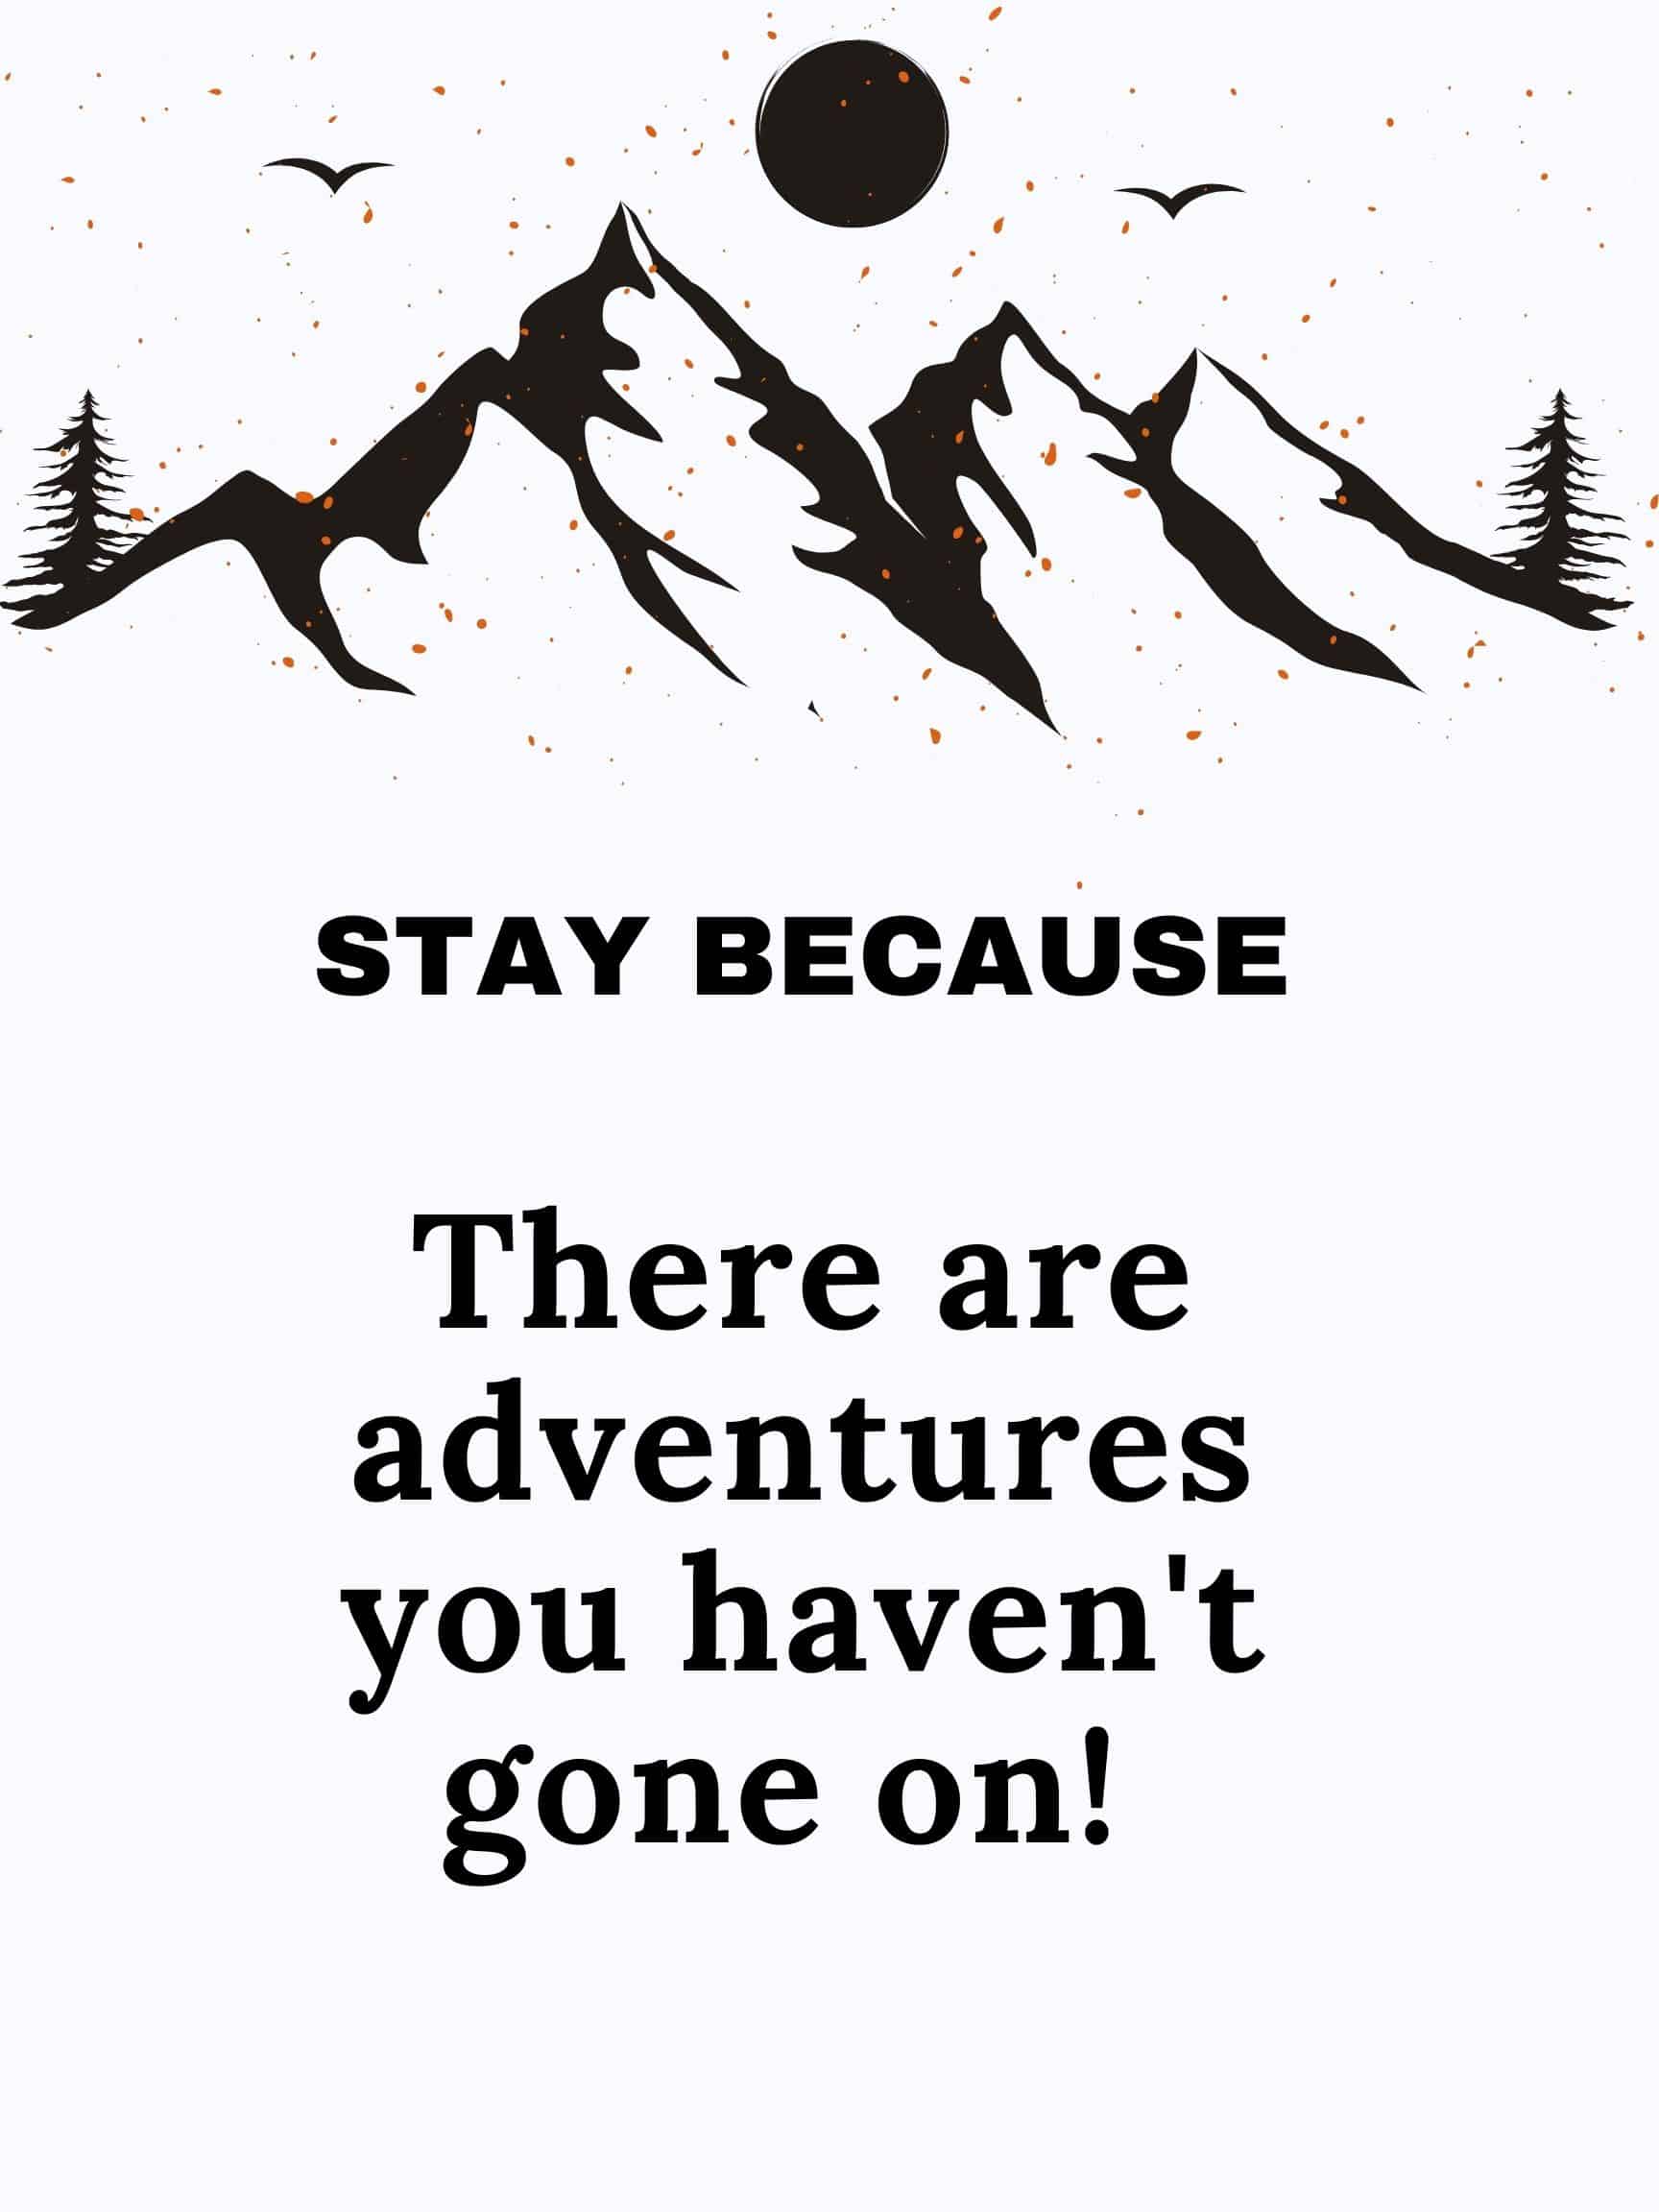 Stay because there are adventures you haven't gone on #StayBecause